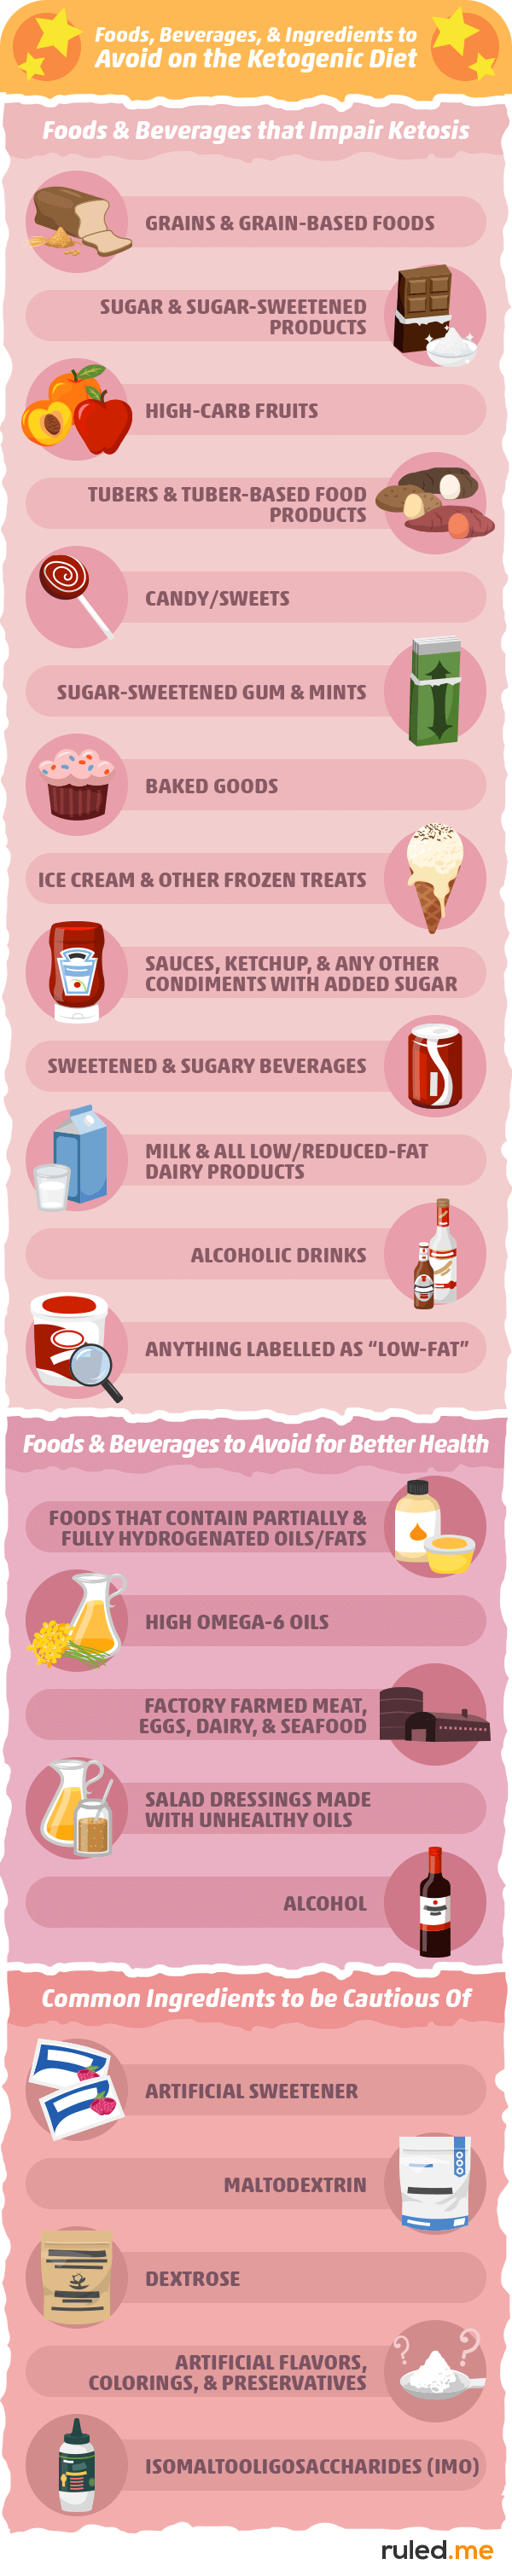  Foods, Drinks, and Ingredients to Avoid on Keto